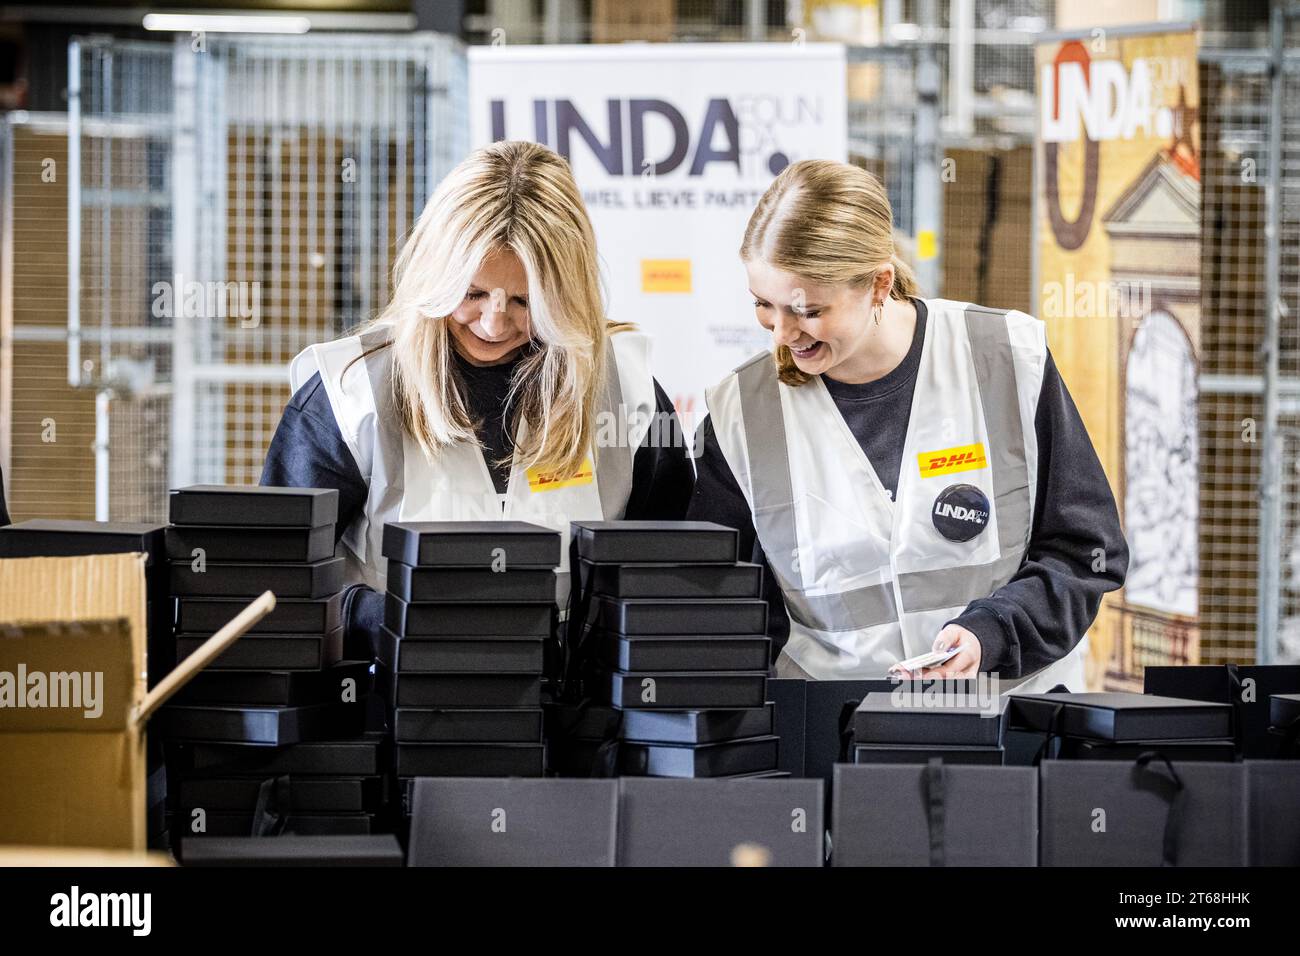 Amersfoort, Netherlands. November 9, 2023.  - TV personality Linda de Mol, together with her daughter Noa Vahle and volunteers, pack gift boxes on behalf of the LINDA.foundation at a DHL distribution center. The packages are for families who are experiencing financial difficulties. ANP ROB ENGELAAR netherlands out - belgium out/Alamy Live News Stock Photo